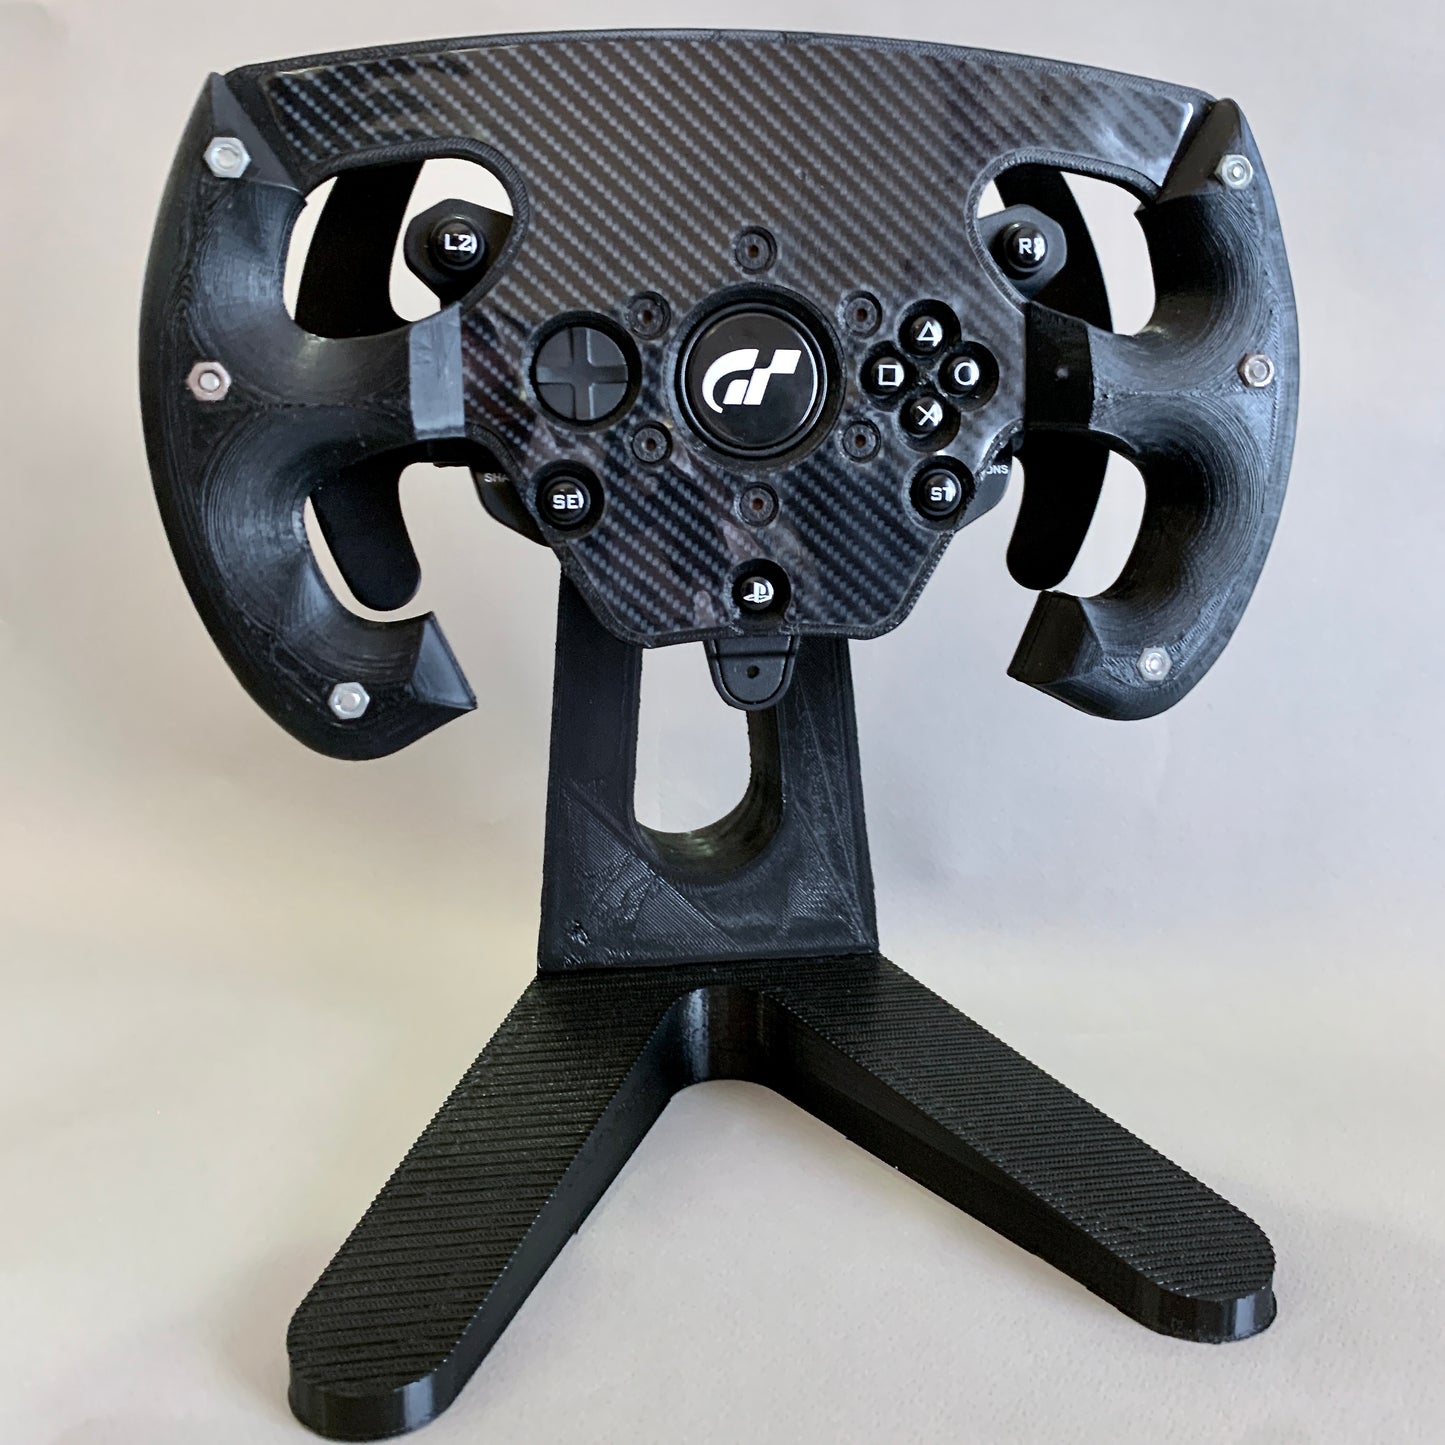 Thrustmaster Sim Wheel Expositor with quick release for T300/T500/TX/TS-PC/t-gt/ts-xw/t-gt2